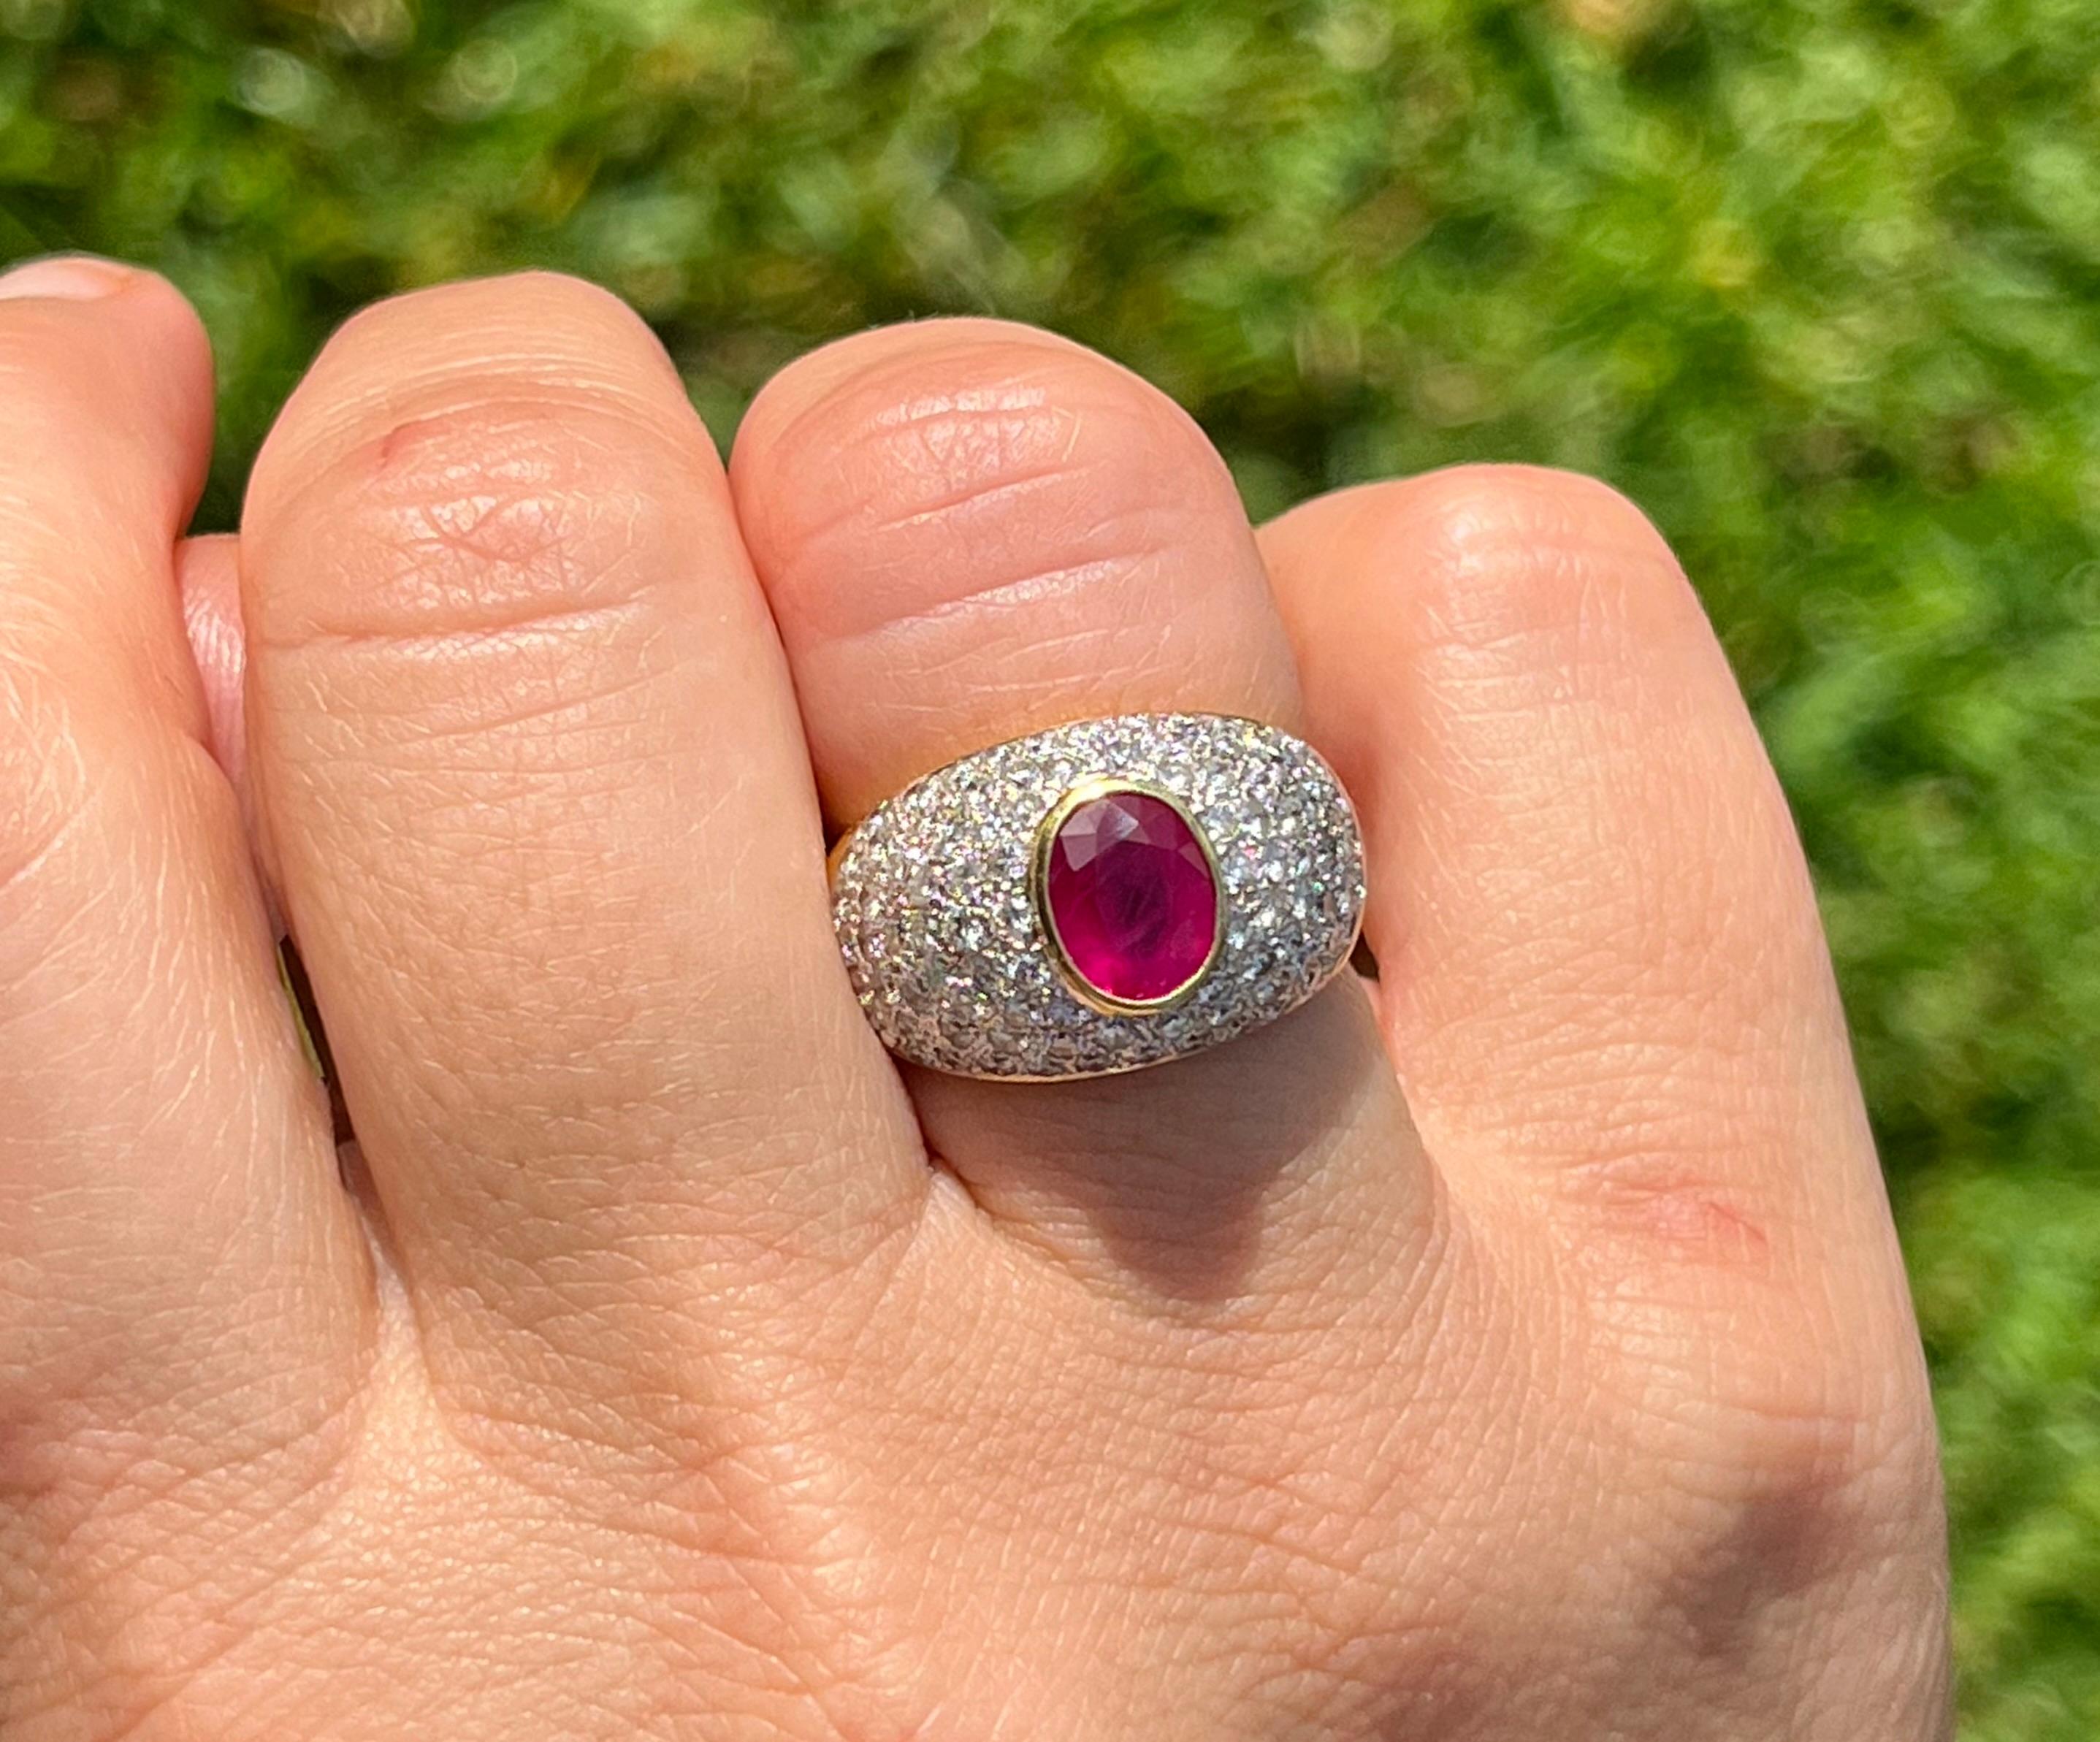 Red and robust, this natural Ruby ring is a classic cocktail ring with Art Deco inspirations. The Ruby is mounted in a secure bezel setting of 18 karat solid yellow gold with a double rhodium-plated white gold overtone where the diamonds set.